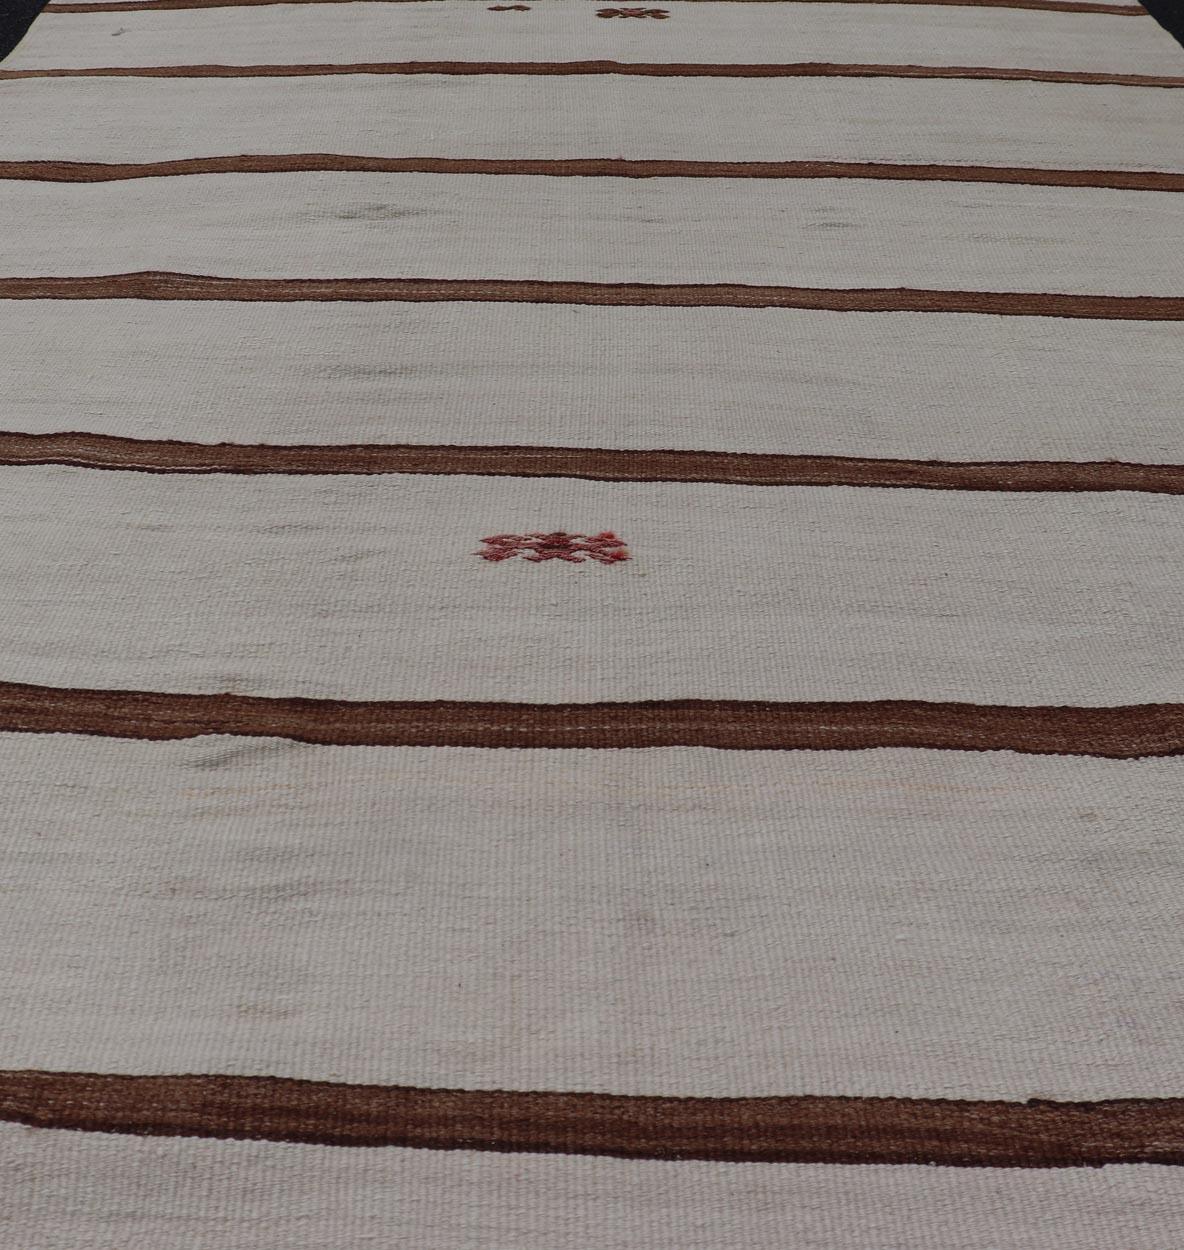 Kilim Turkish Vintage Flat-Weave in Light Brown and Cream with Stripe Design For Sale